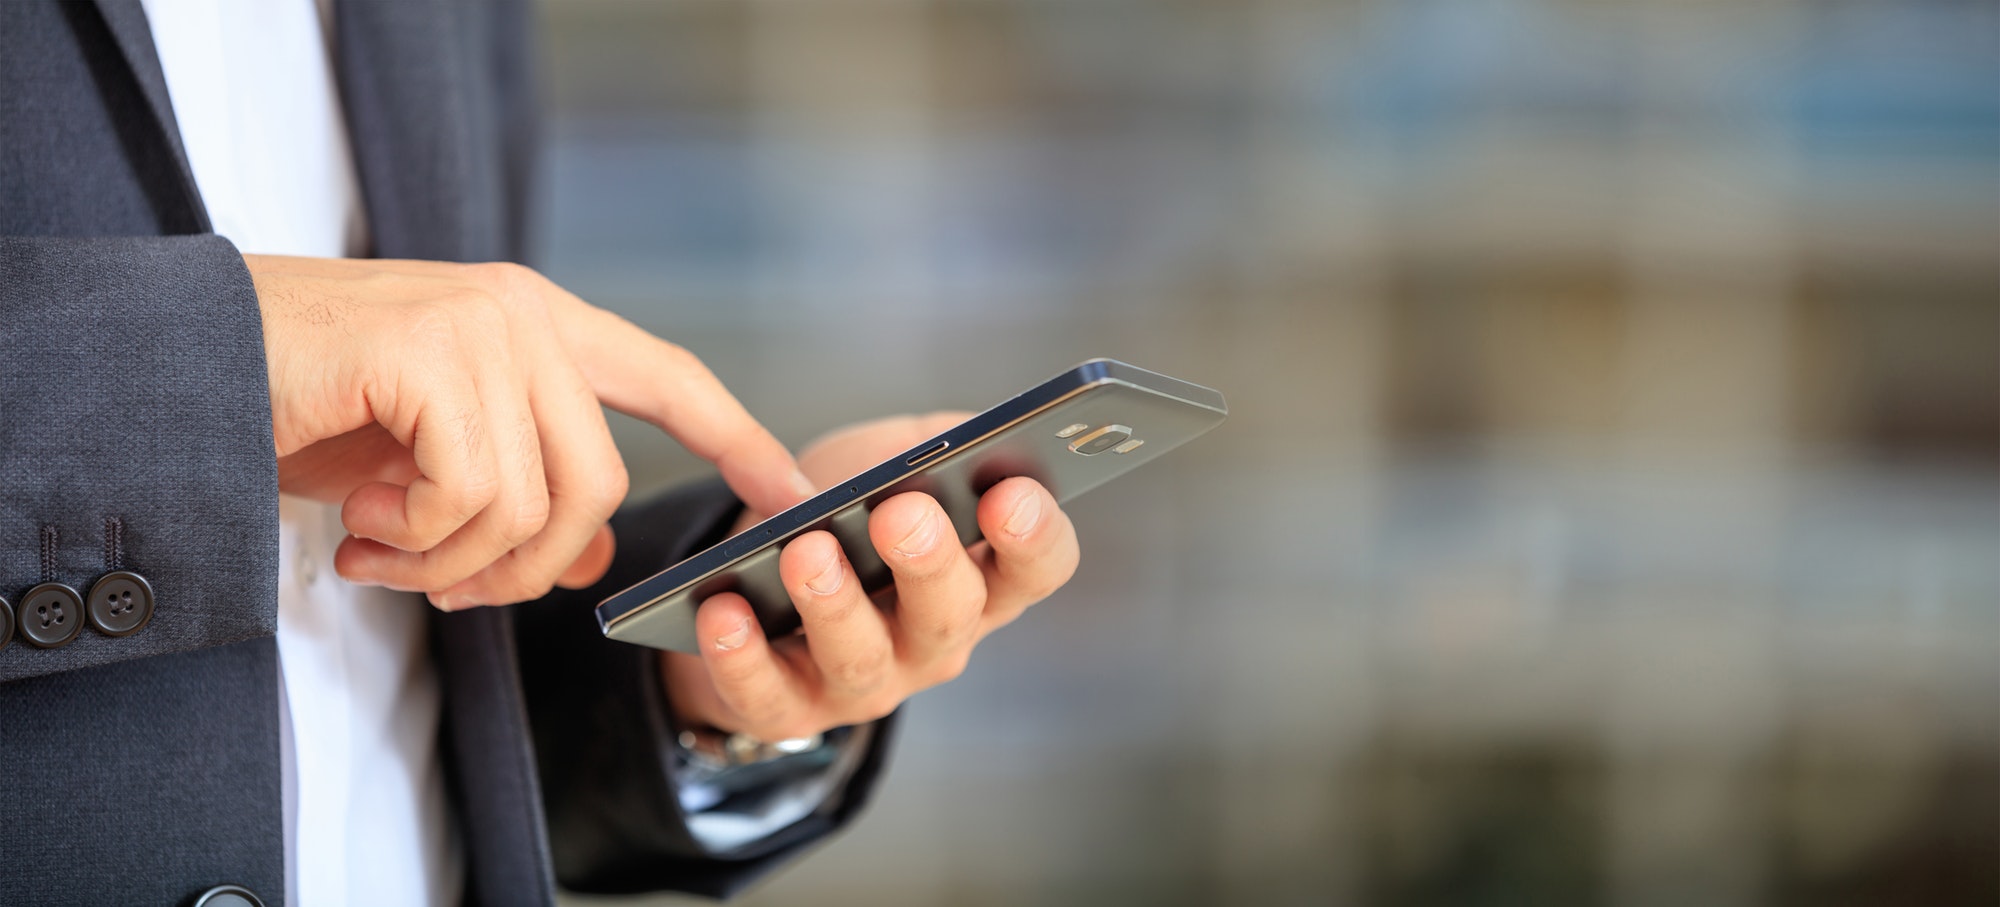 Man holding phone. Young businessman in business wear using a mobile, closeup view on smartphone